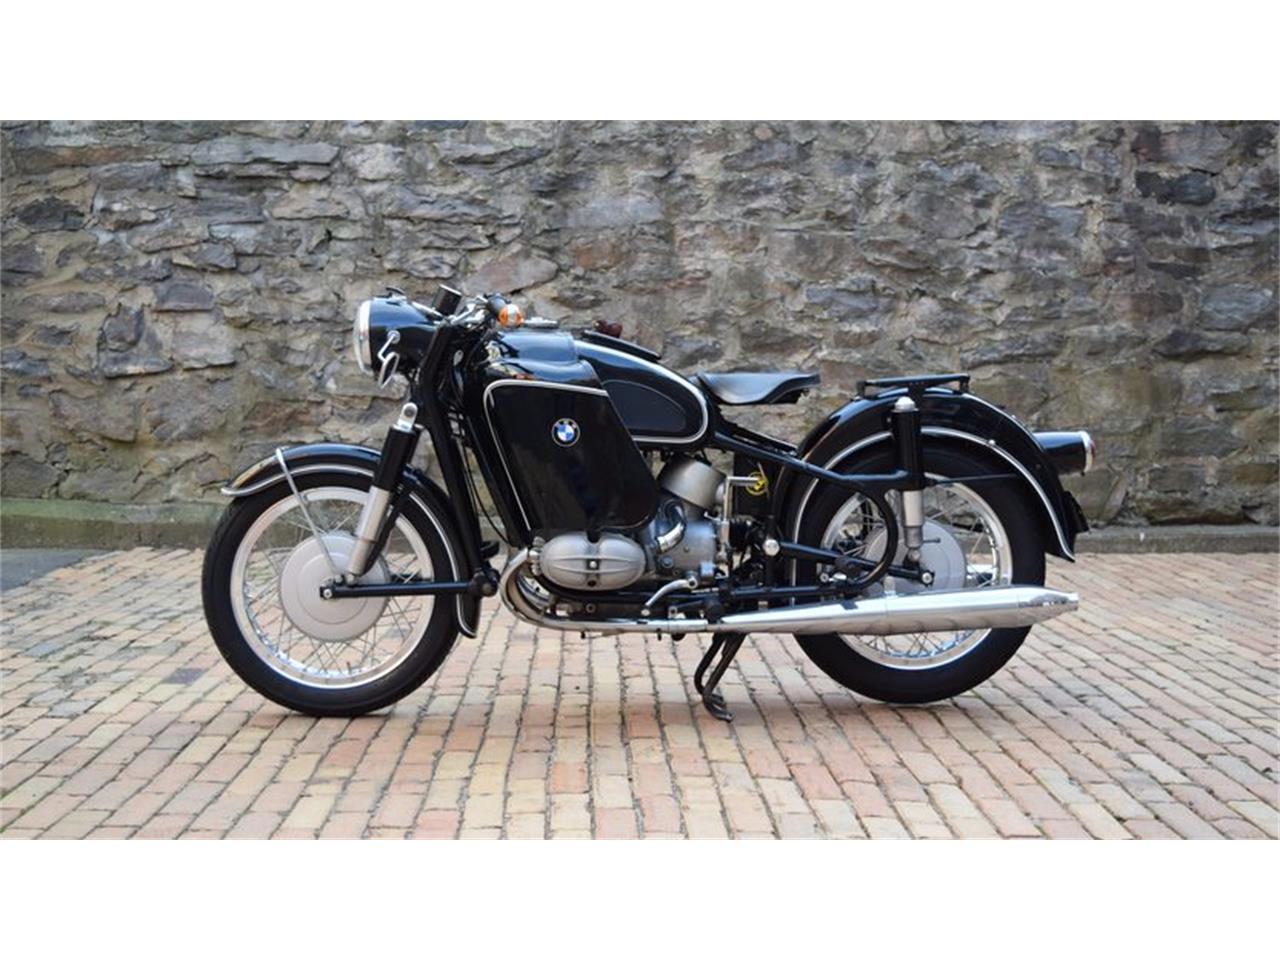 1964 BMW Motorcycle for Sale | ClassicCars.com | CC-929688